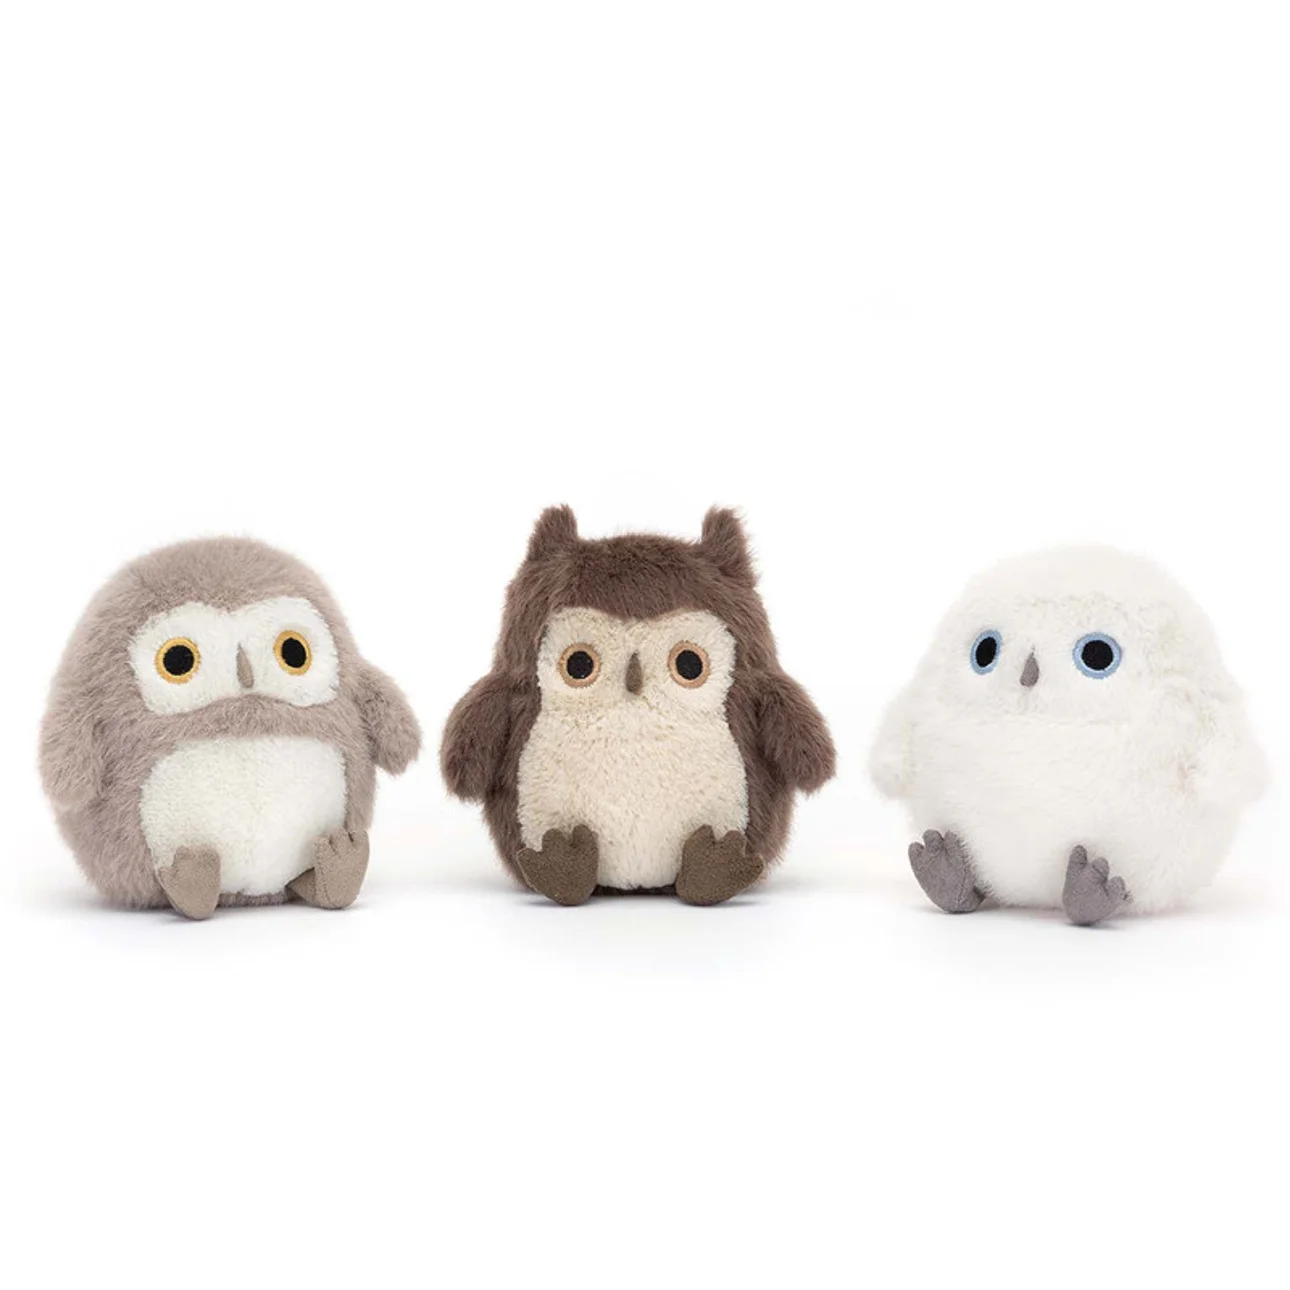 Jellycat: Cuddly Owl Brown Brown Owling 11 cm